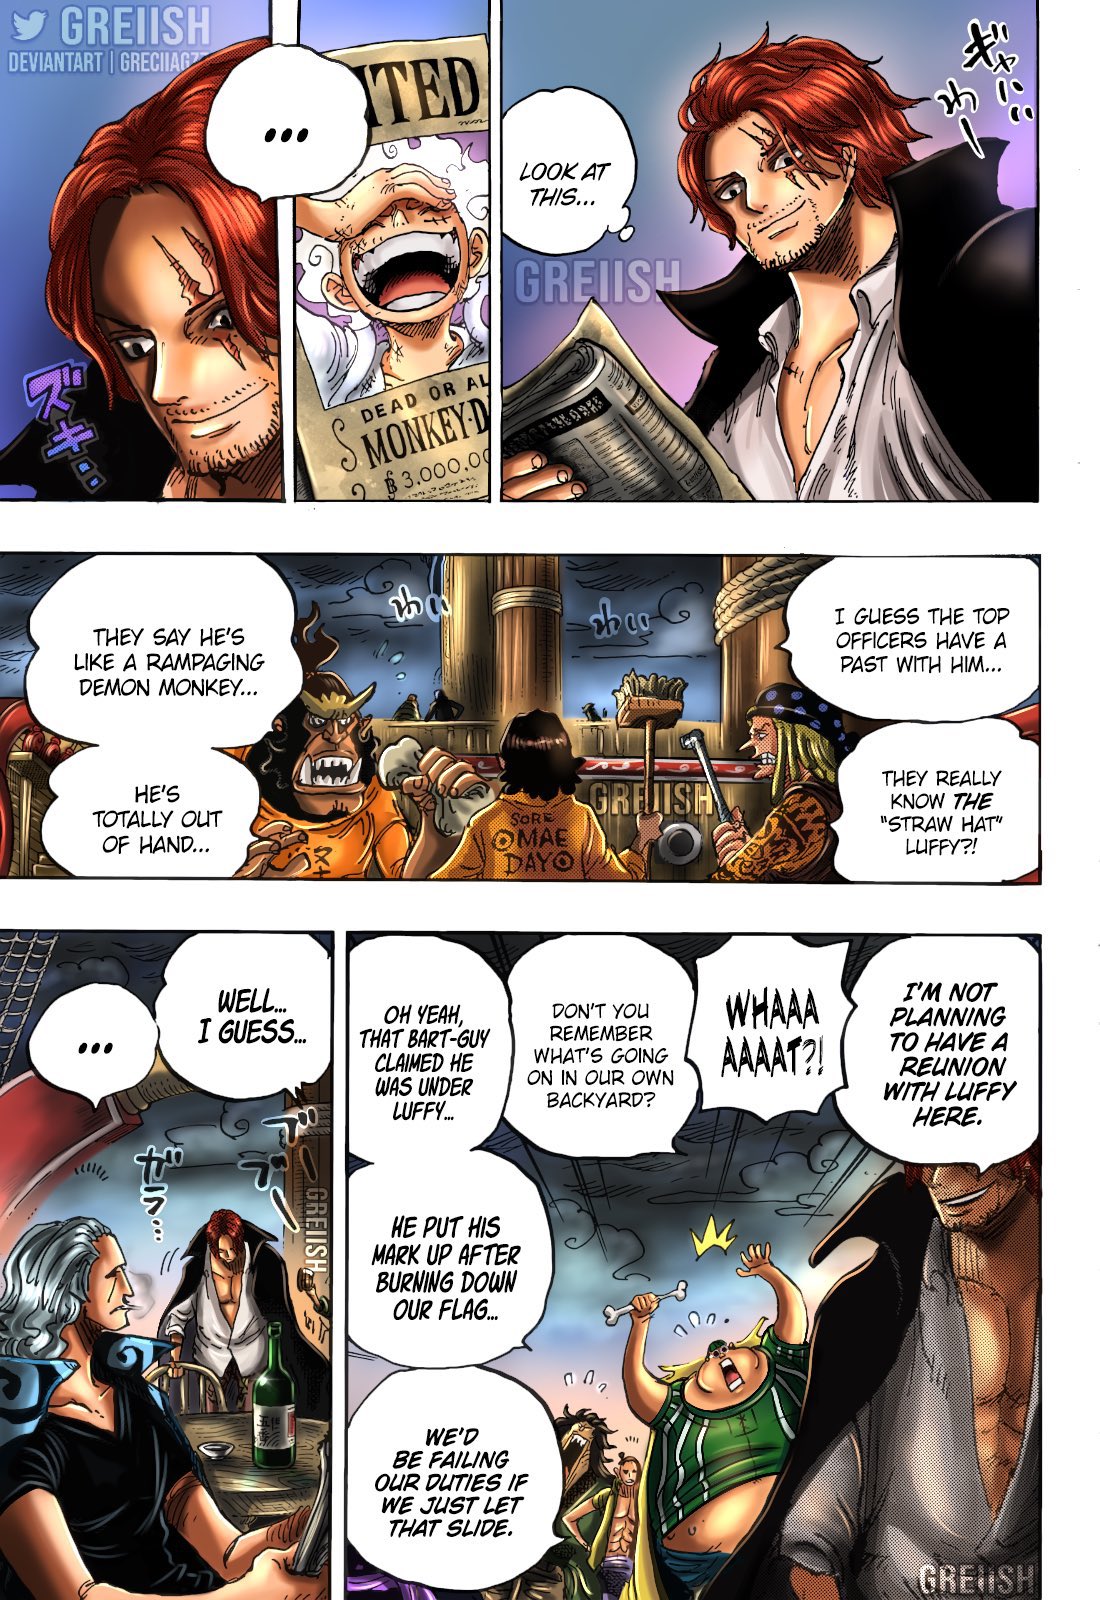 THESE ONE PIECE SPOILERS CAN'T BE REAL!! New Chapter 1044 Luffy Leaks  Change EVERYTHING in OP 